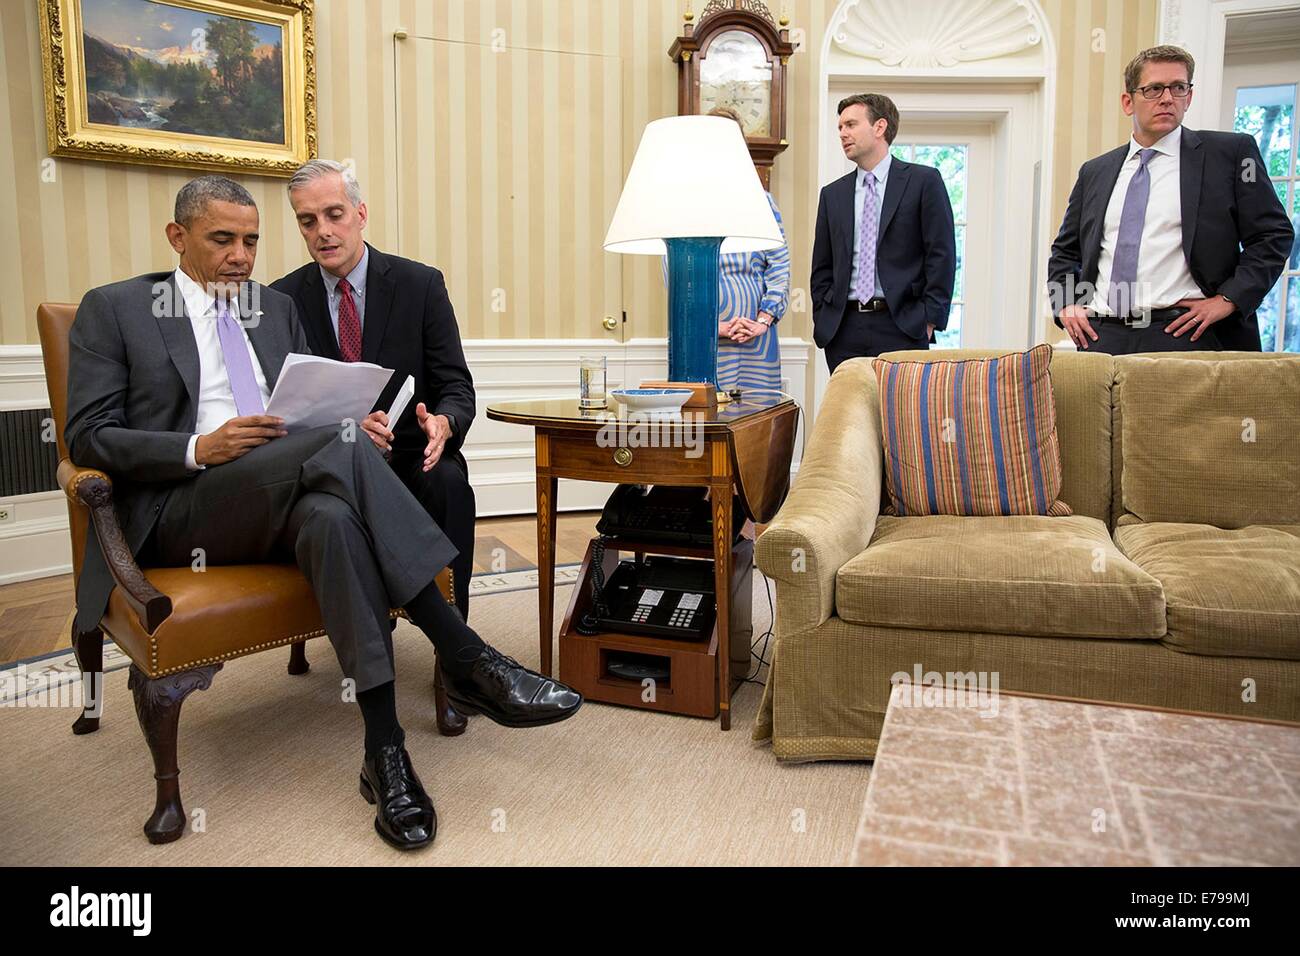 US President Barack Obama confers with Chief of Staff Denis McDonough before delivering statements to the press with Prime Minister Tony Abbott of Australia in the Oval Office of the White House June 12, 2014 in Washington, DC. Standing at right are: Jennifer Palmieri, Director of Communications; Principal Deputy Press Secretary Josh Earnest; and Press Secretary Jay Carney. Stock Photo